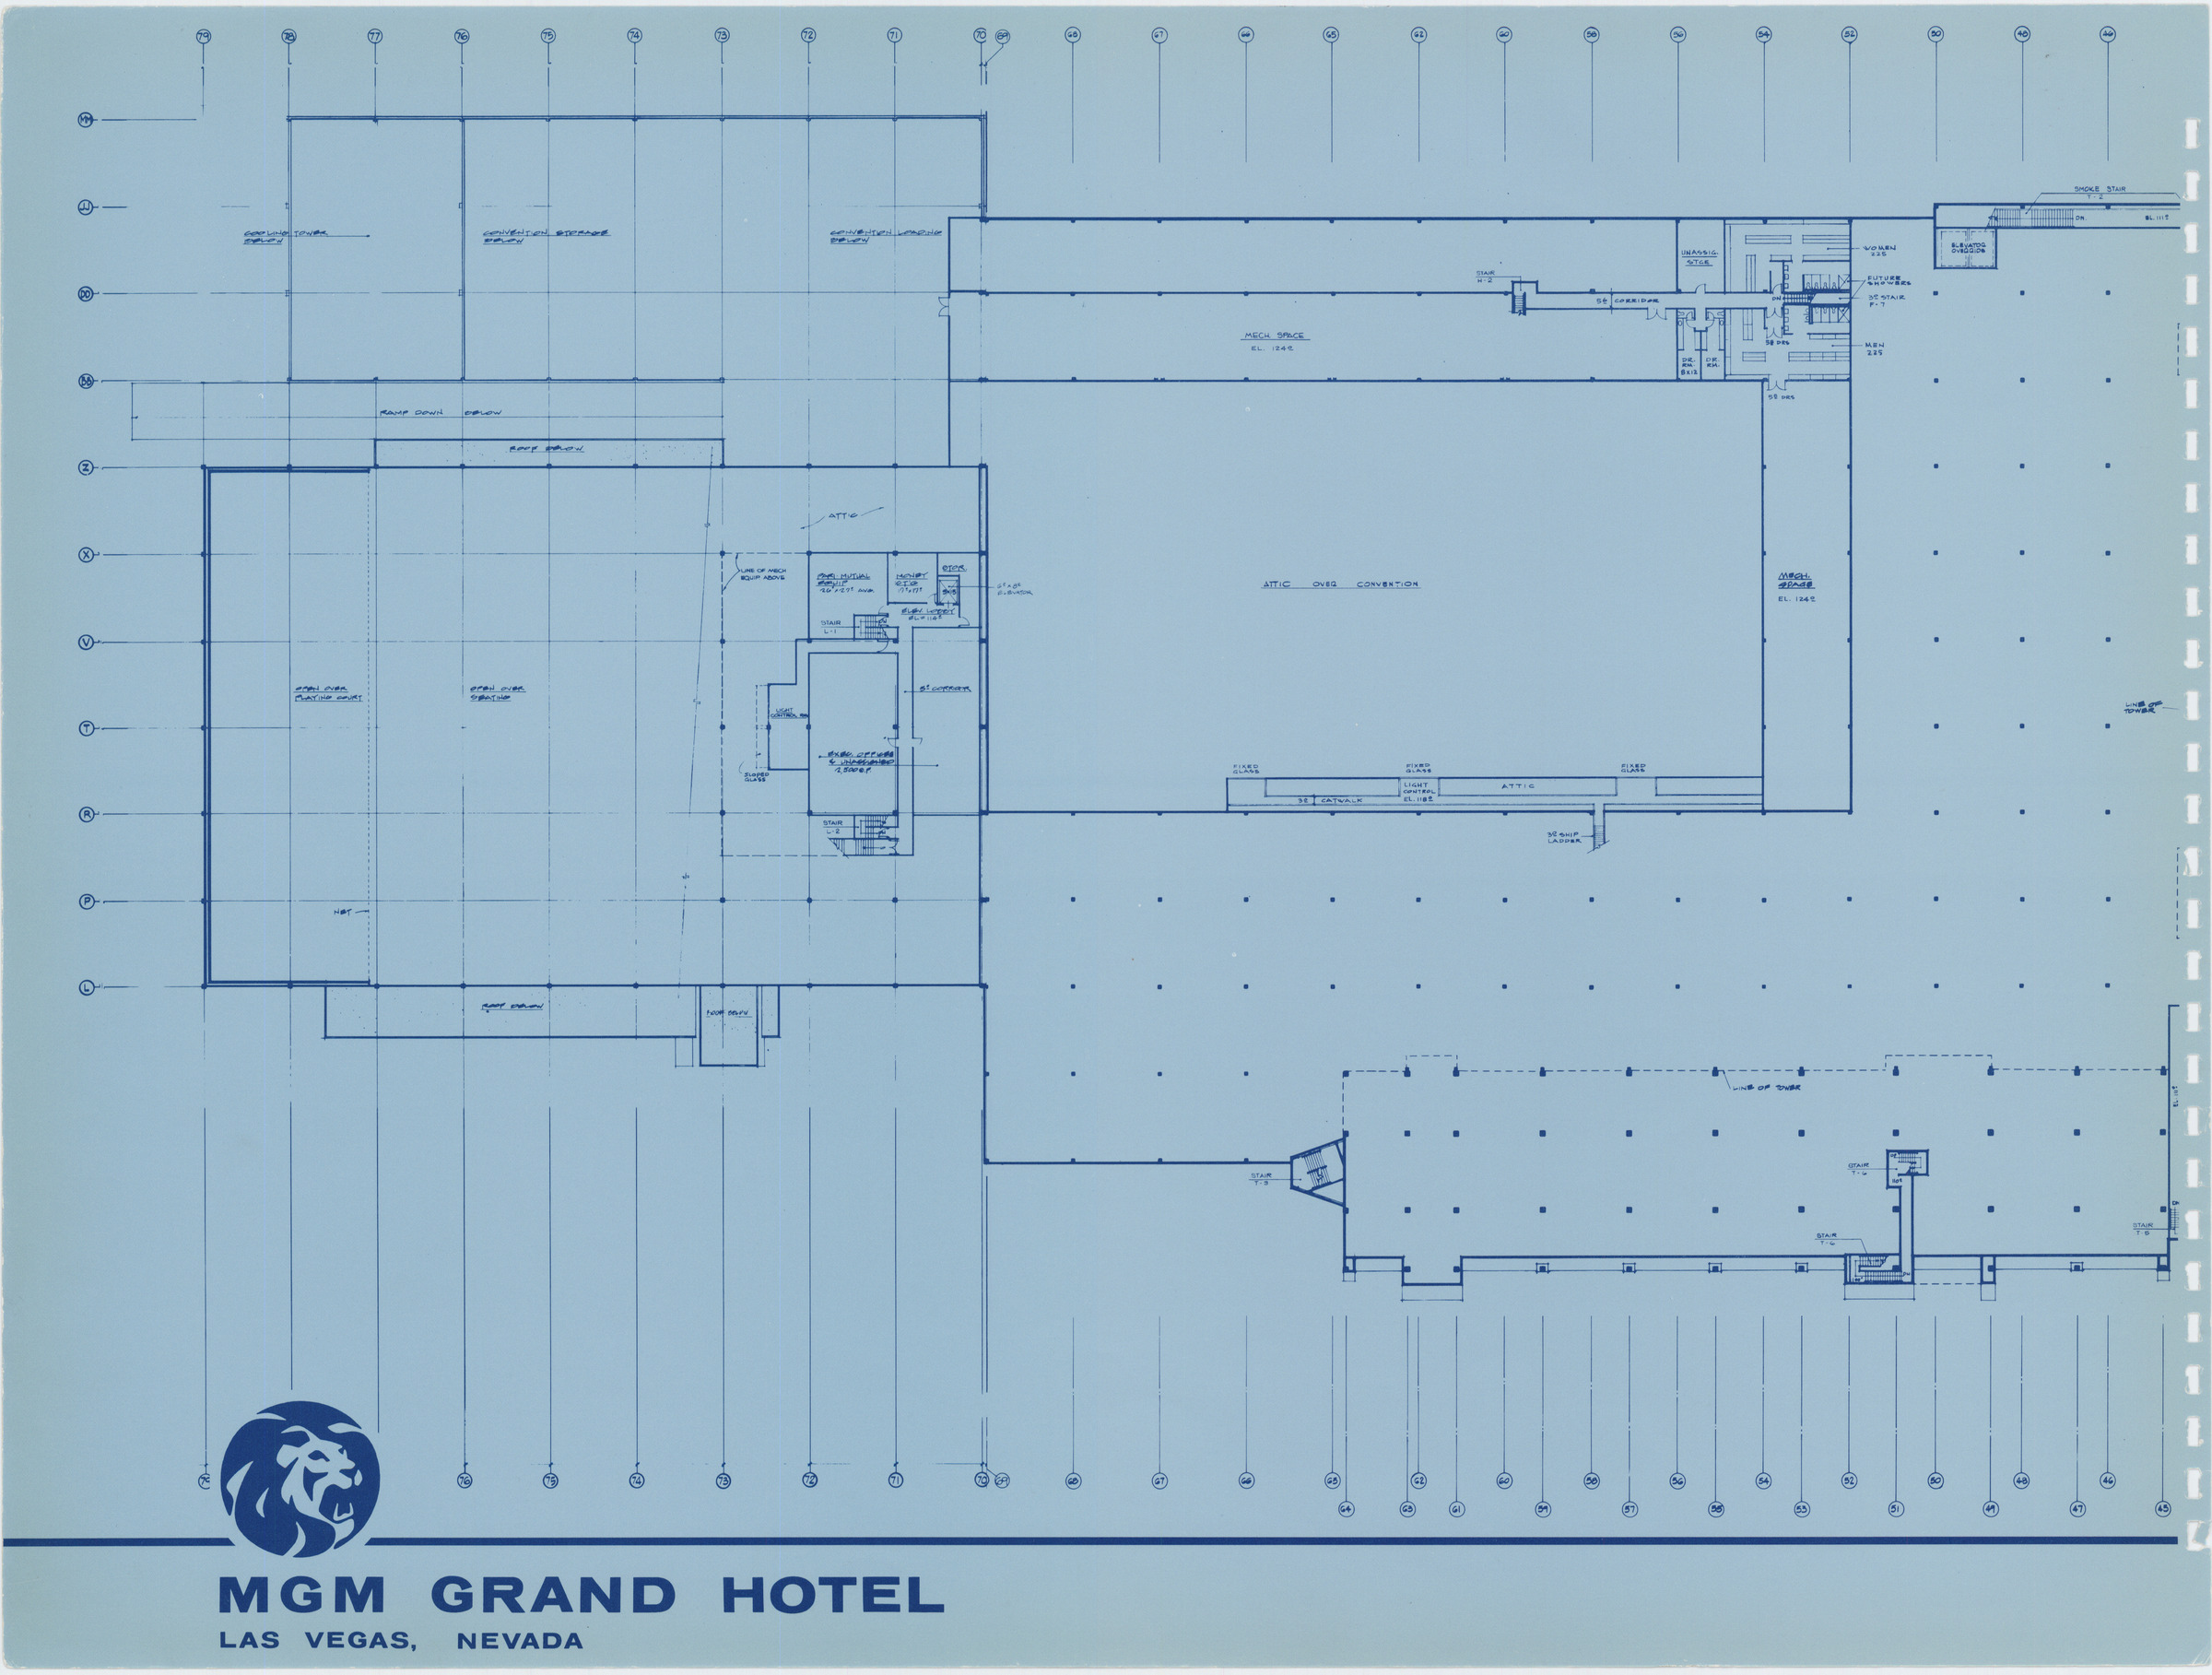 Proposal for the MGM Grand Hotel (Las Vegas), circa 1972, image 9